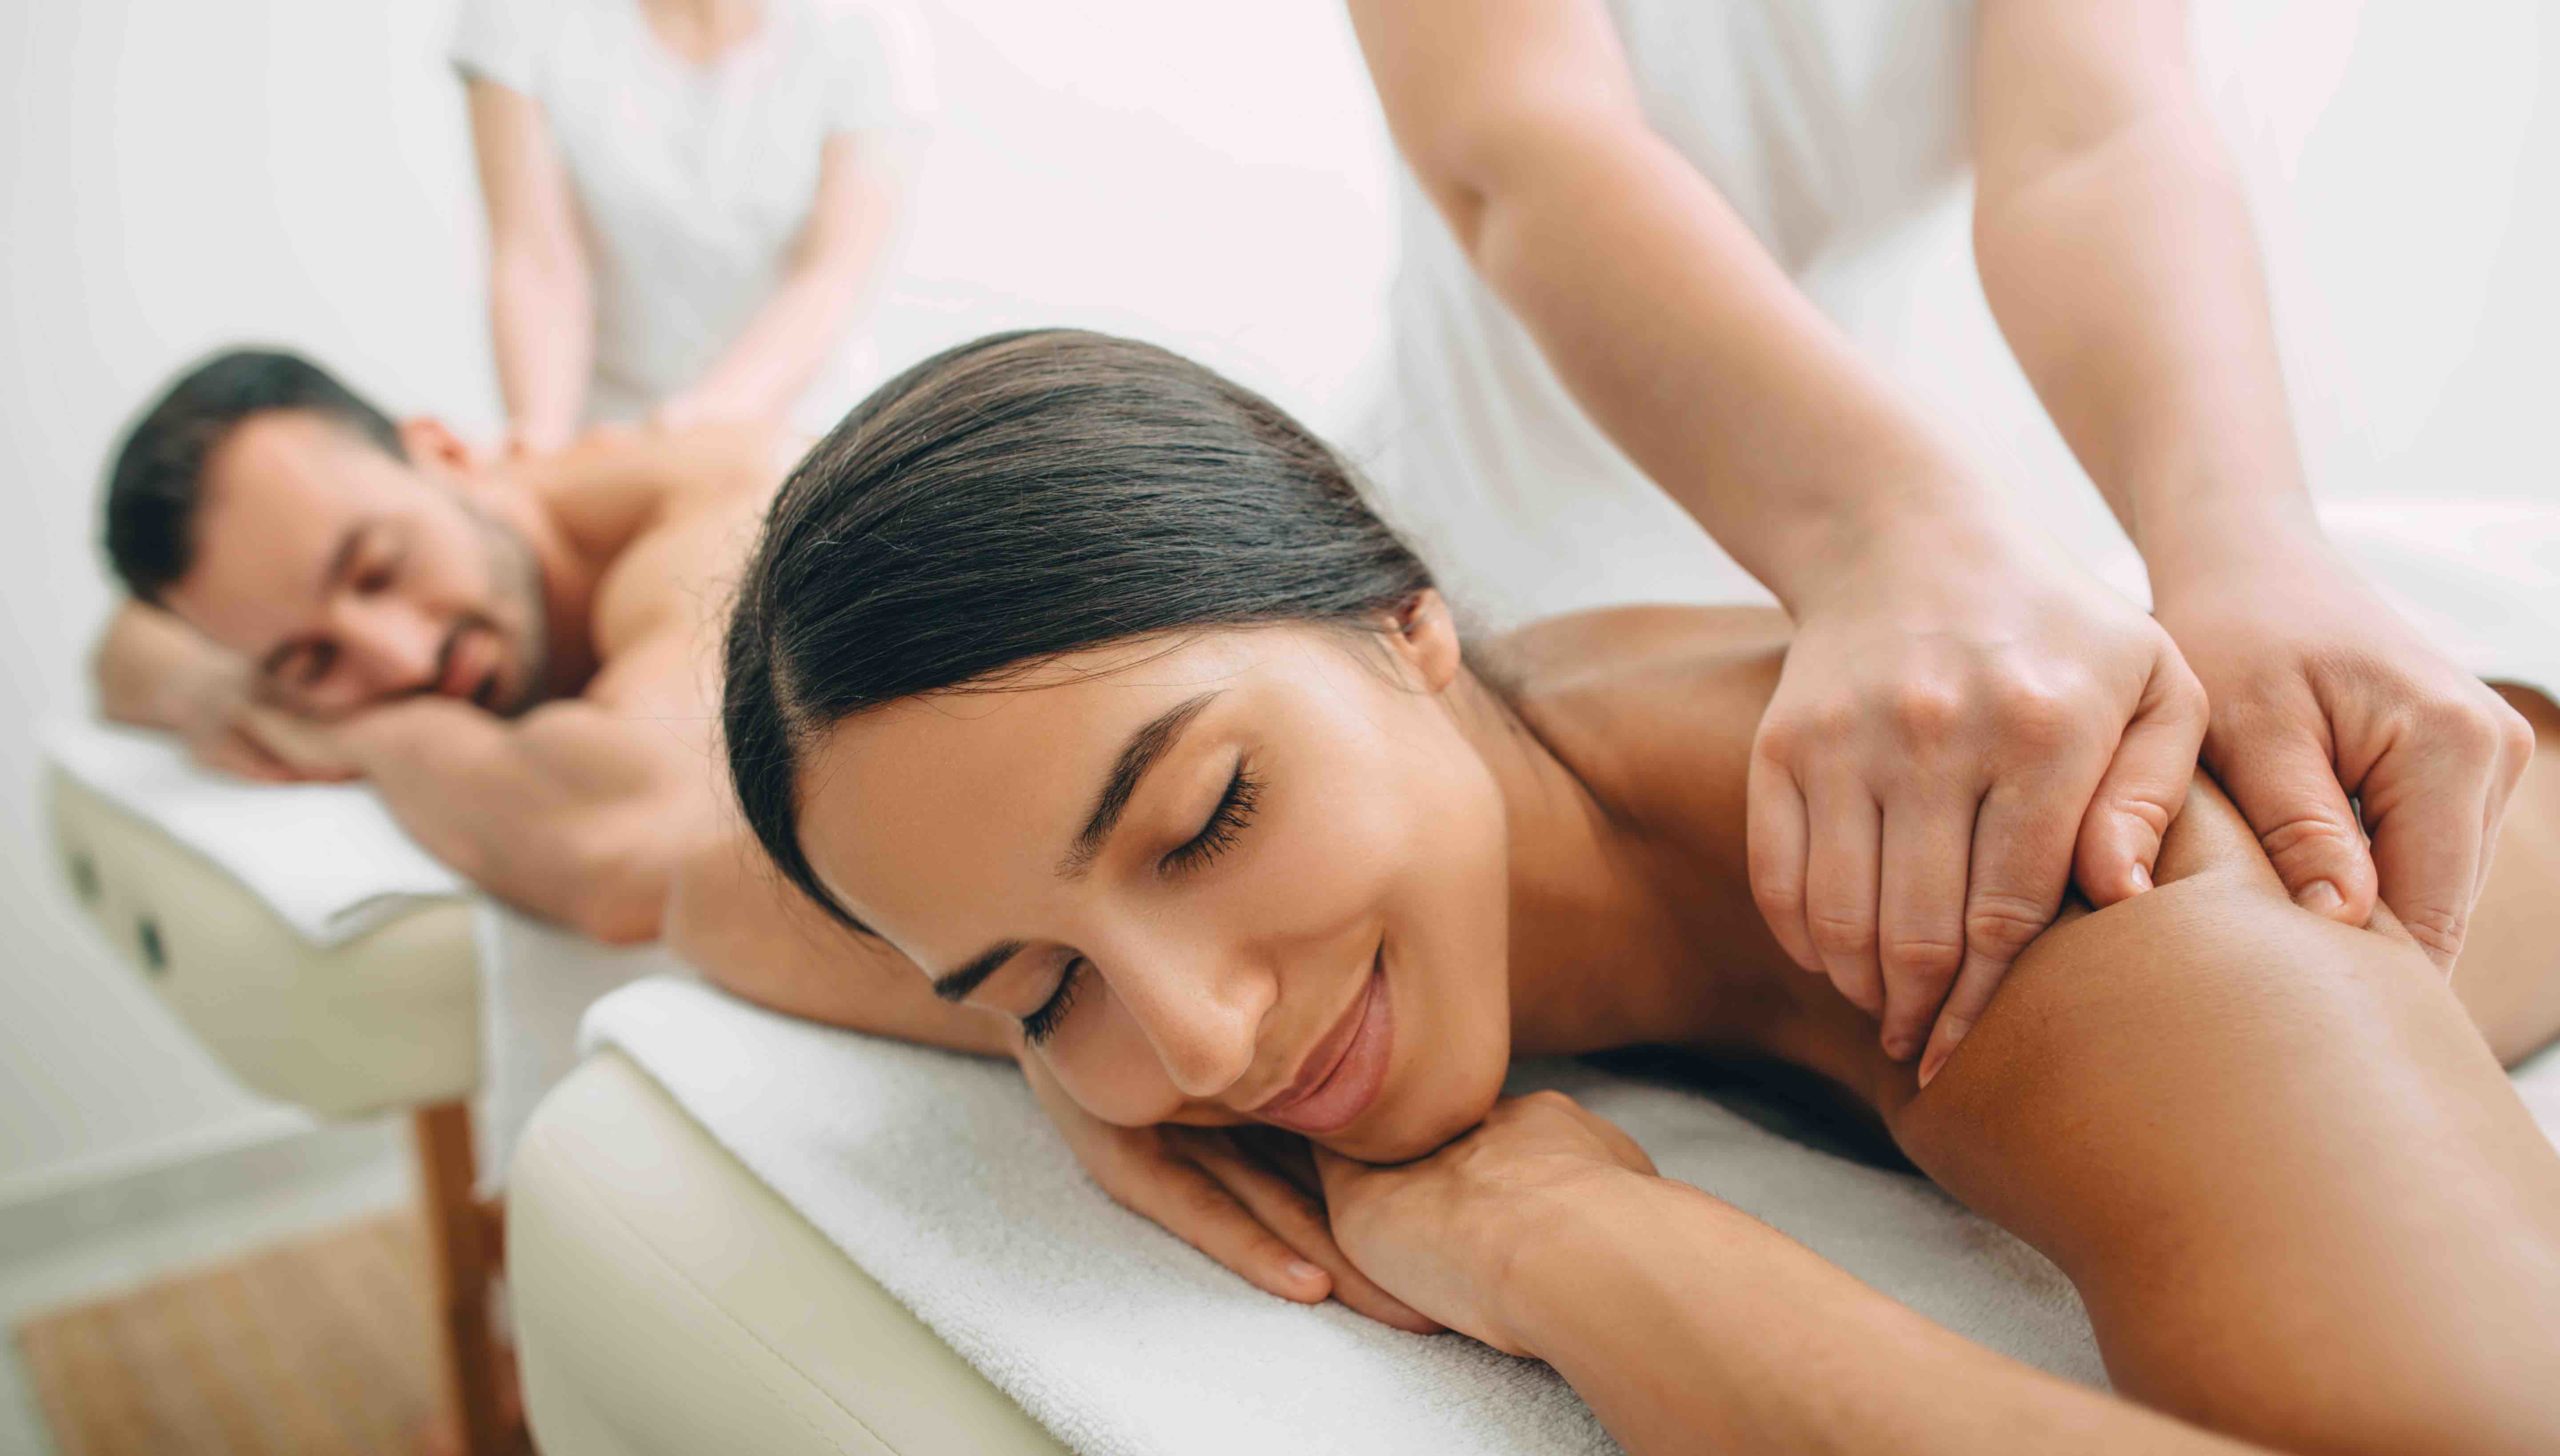 What is a Couples Massage? Everything You Need to Know About this Popular Treatment